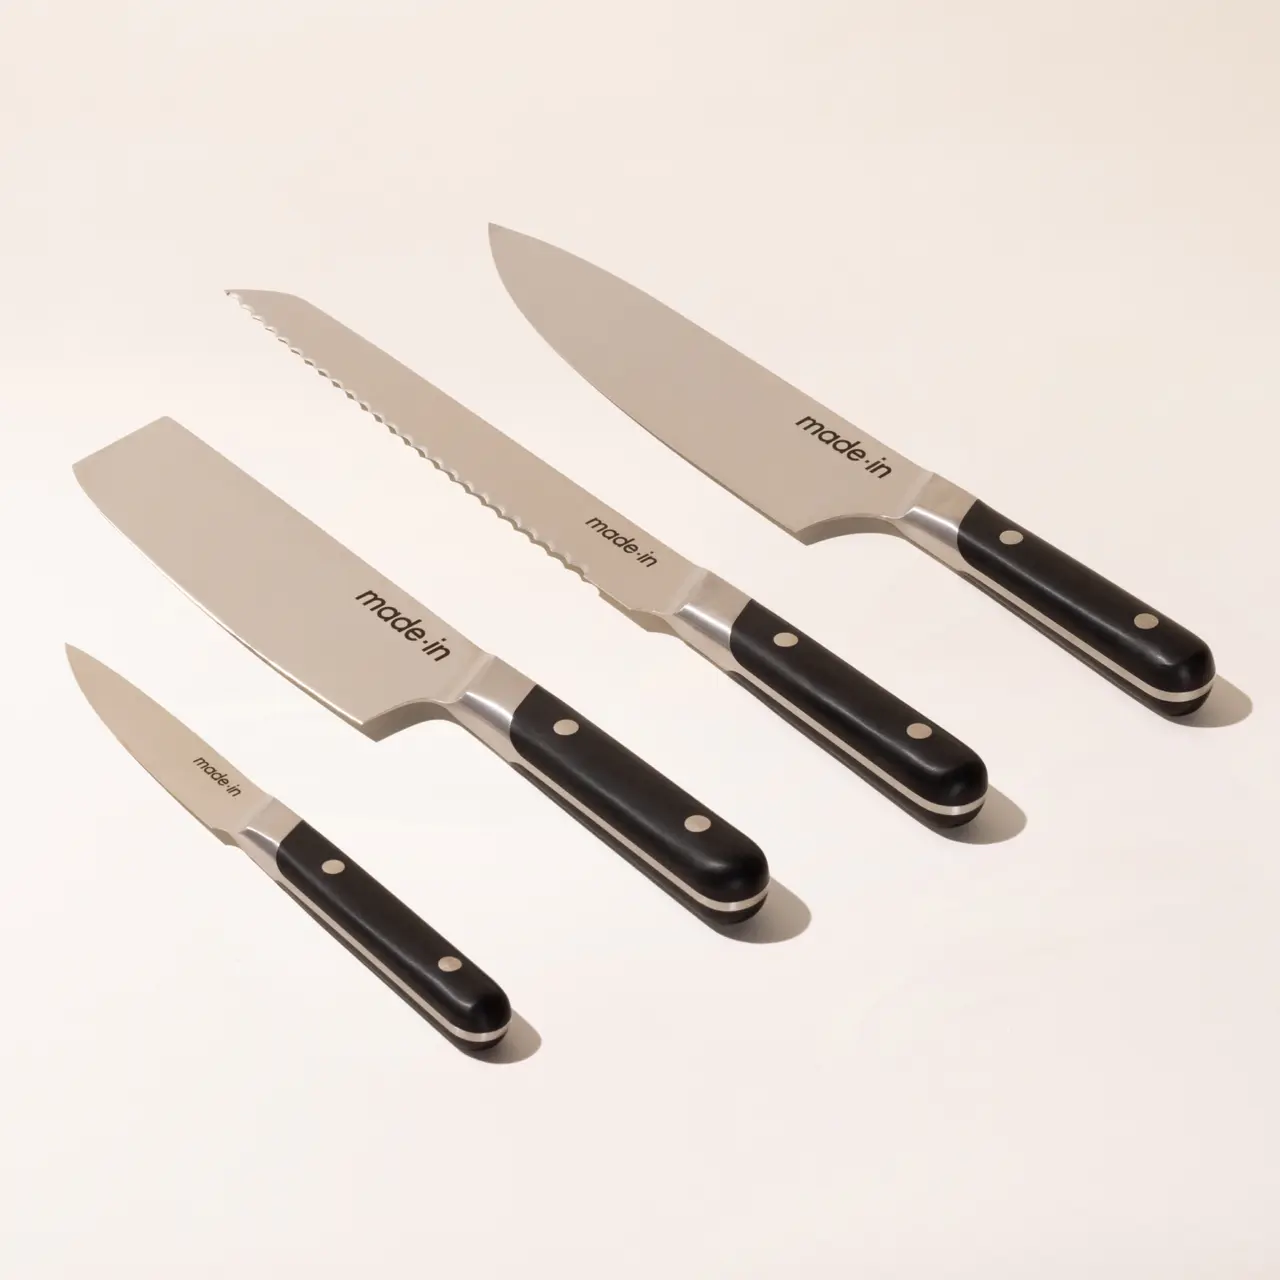 Four kitchen knives with black handles are displayed on a light background, consisting of a chef's knife, a serrated bread knife, a utility knife, and a paring knife.